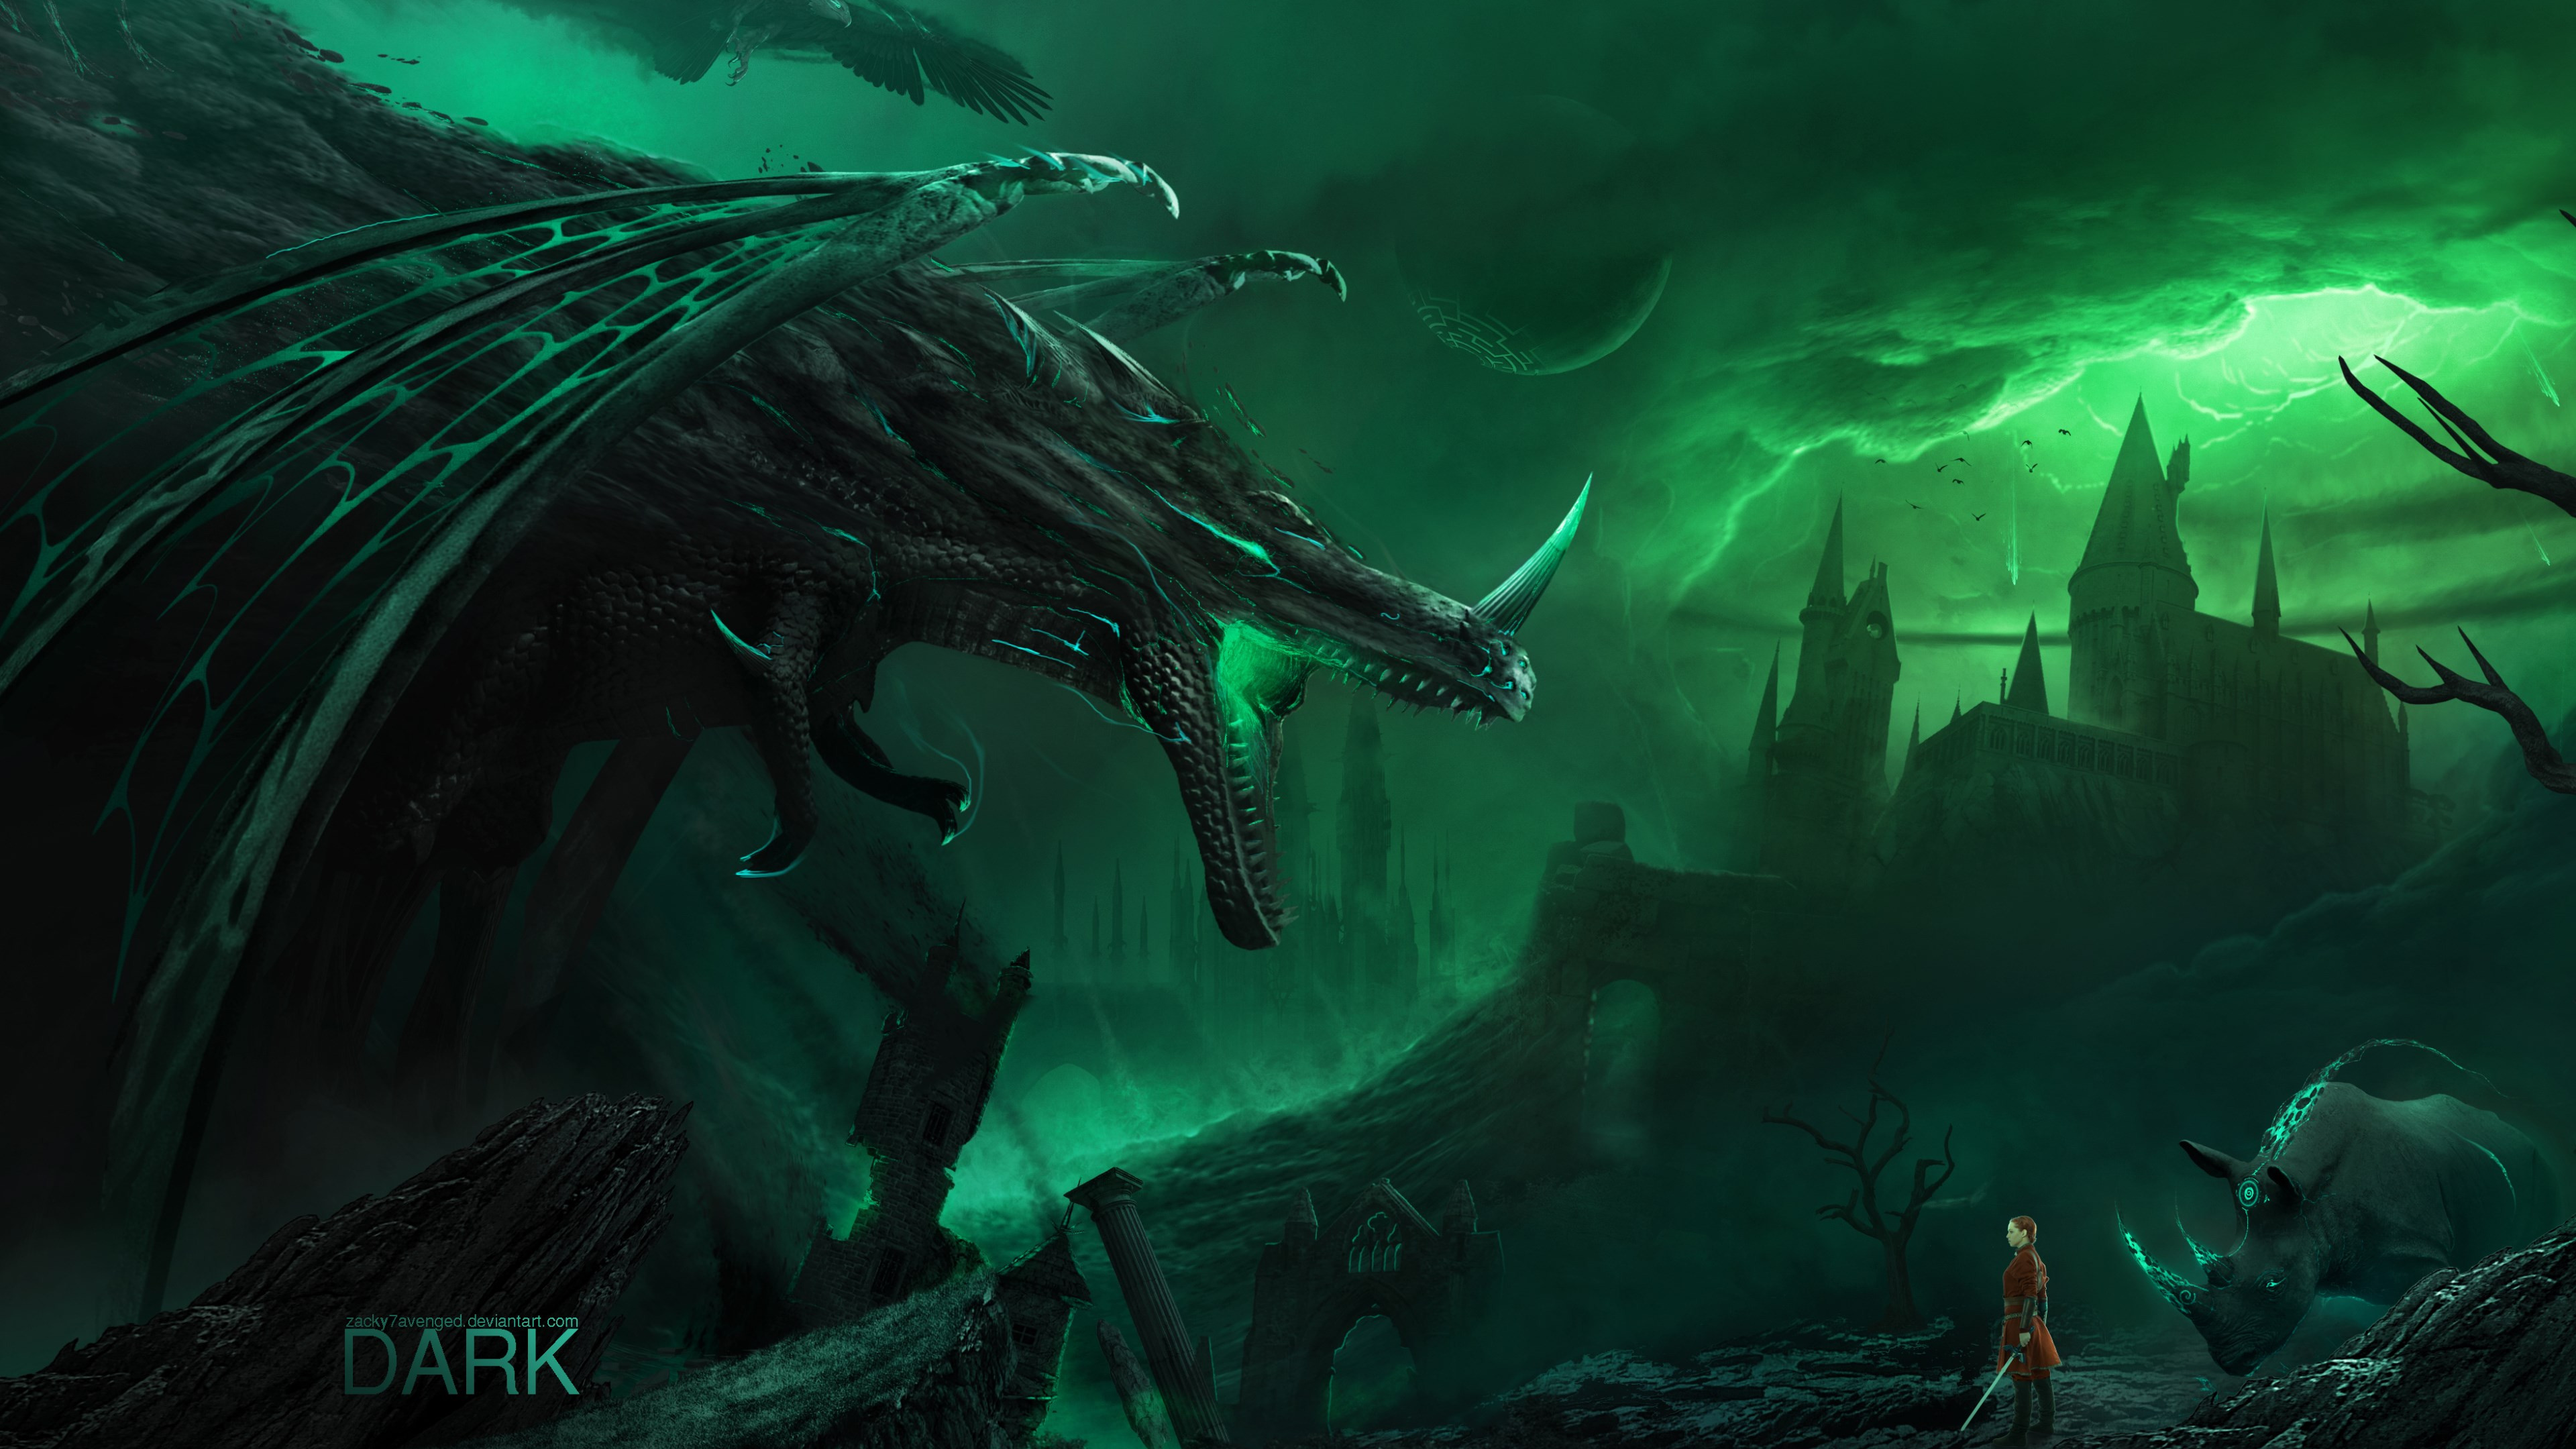 The dark creatures are coming wallpaper 3840x2160